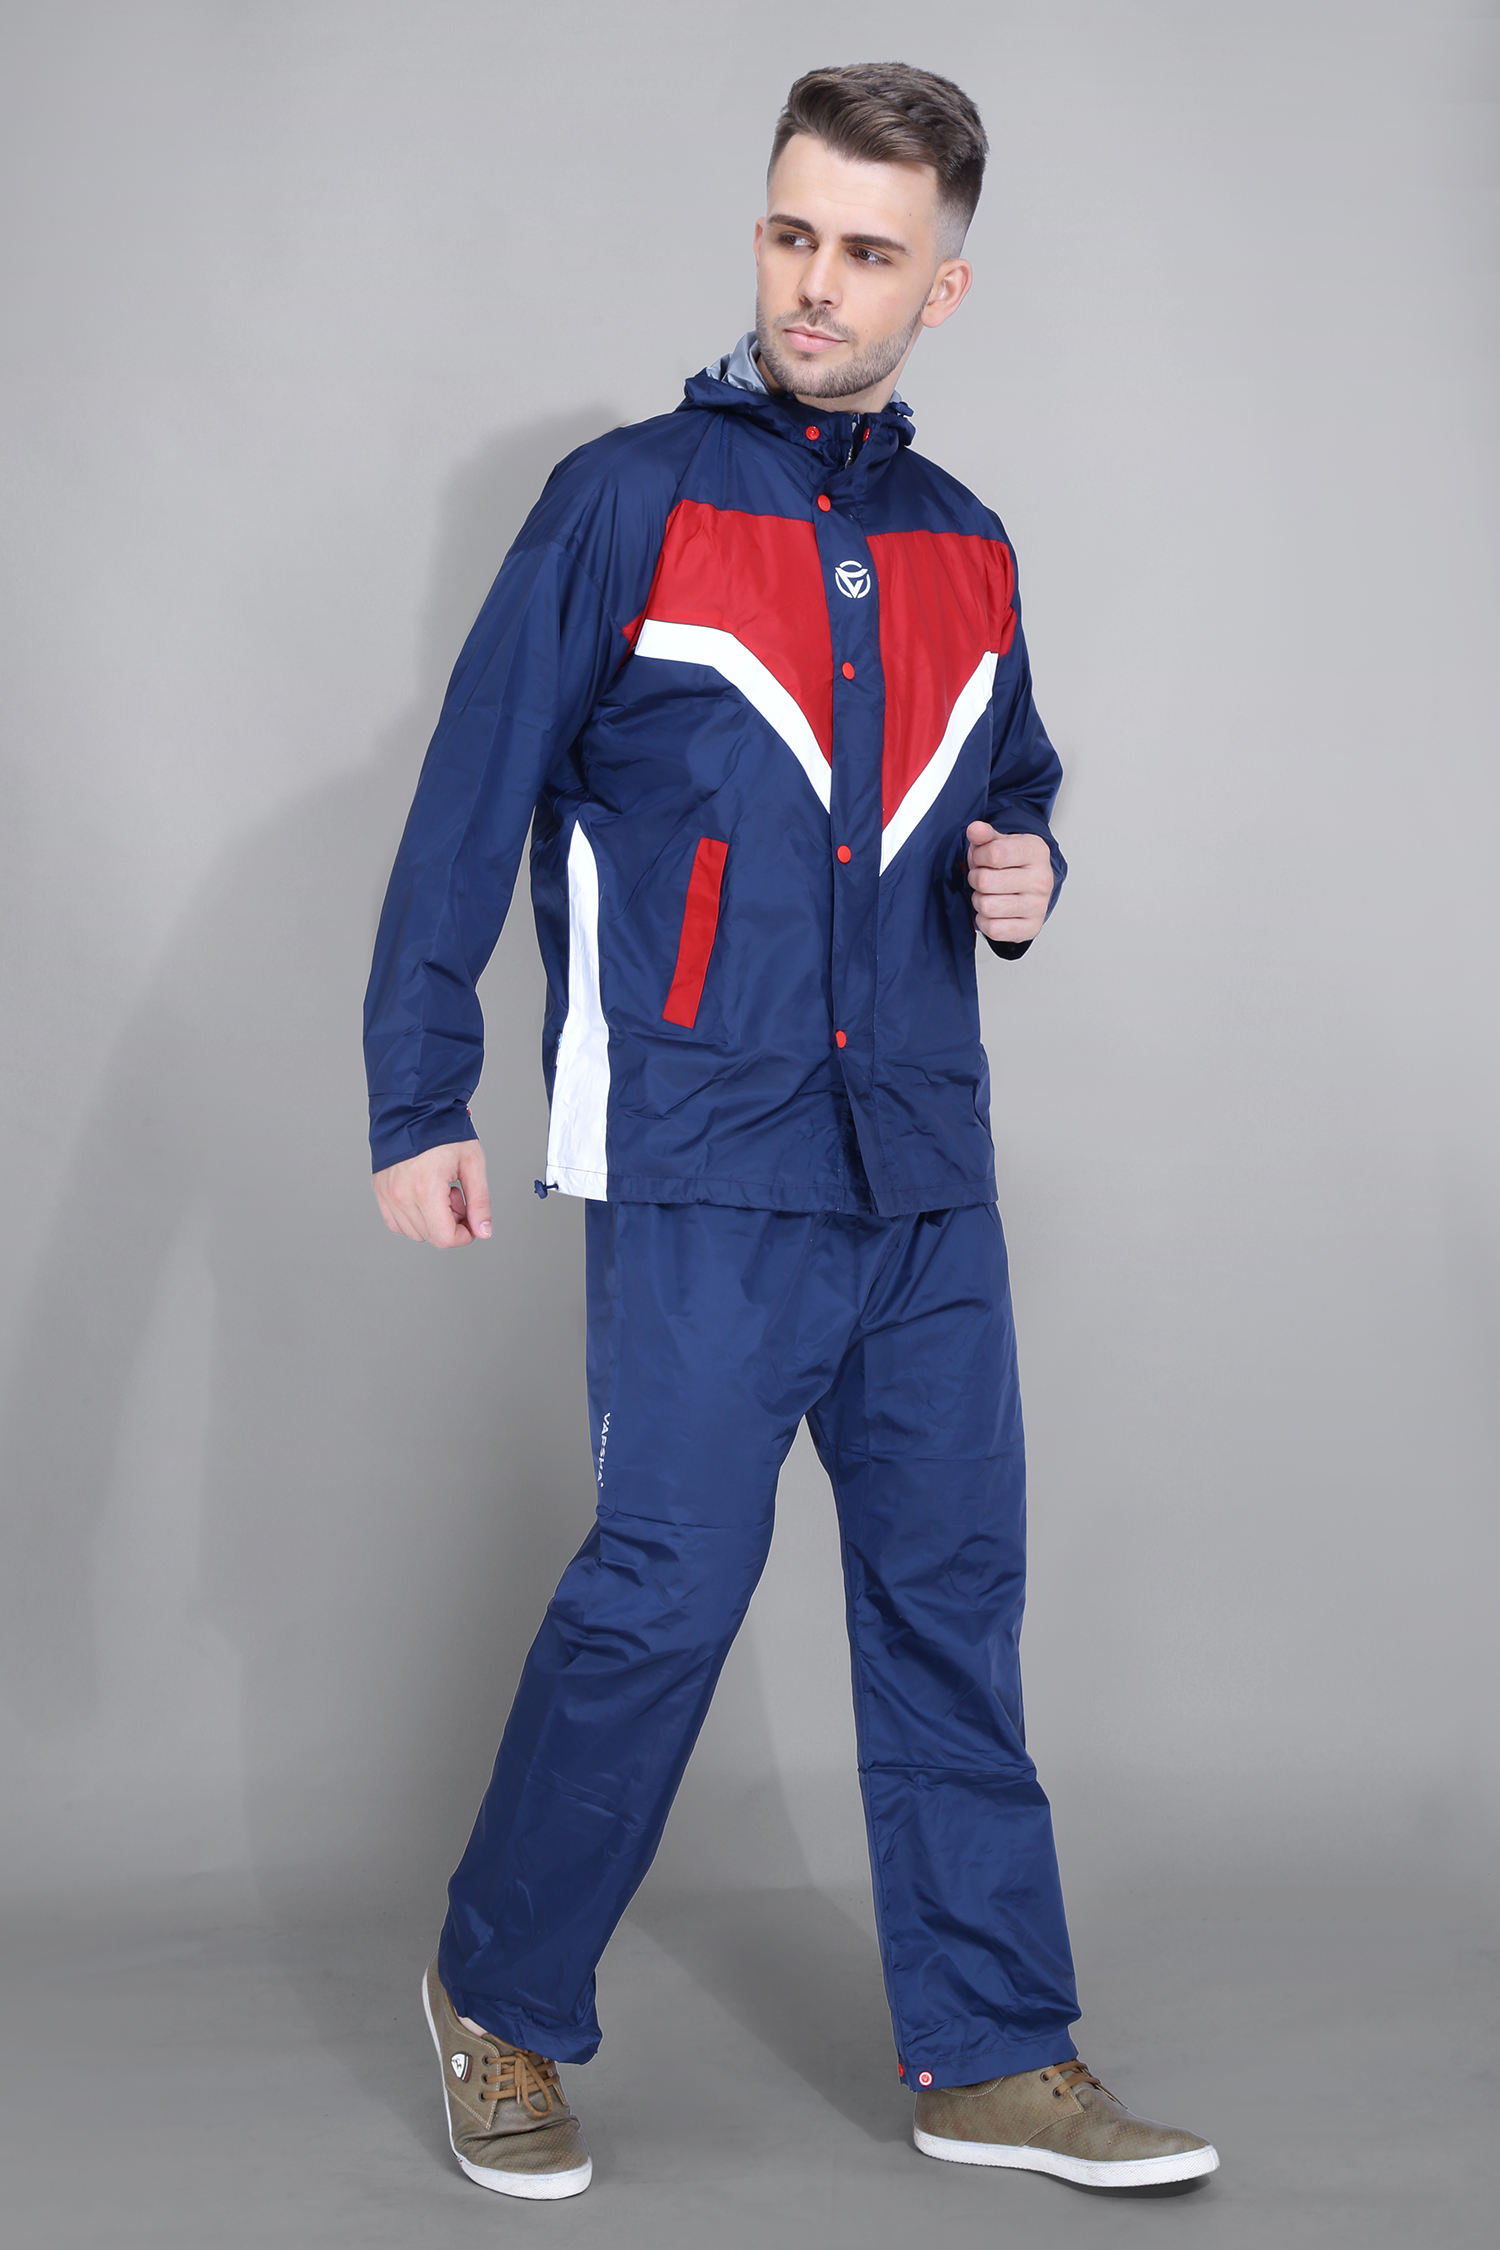 Reversible, Double-Layered Rain Suit for Men - V3 - Blue&Red, XL